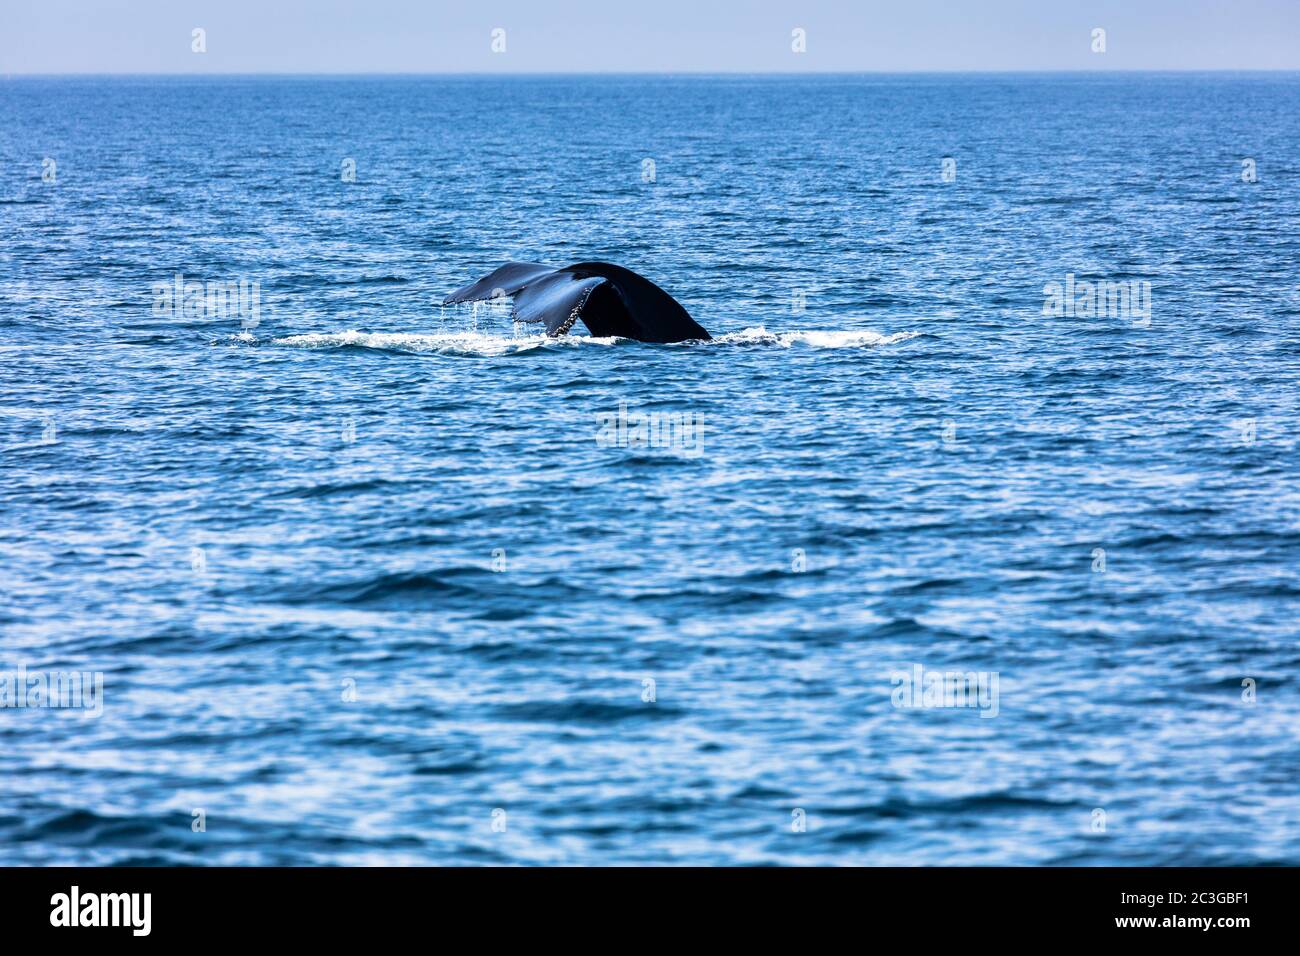 Whale in Cape Cod, Massachussetts, United States Stock Photo